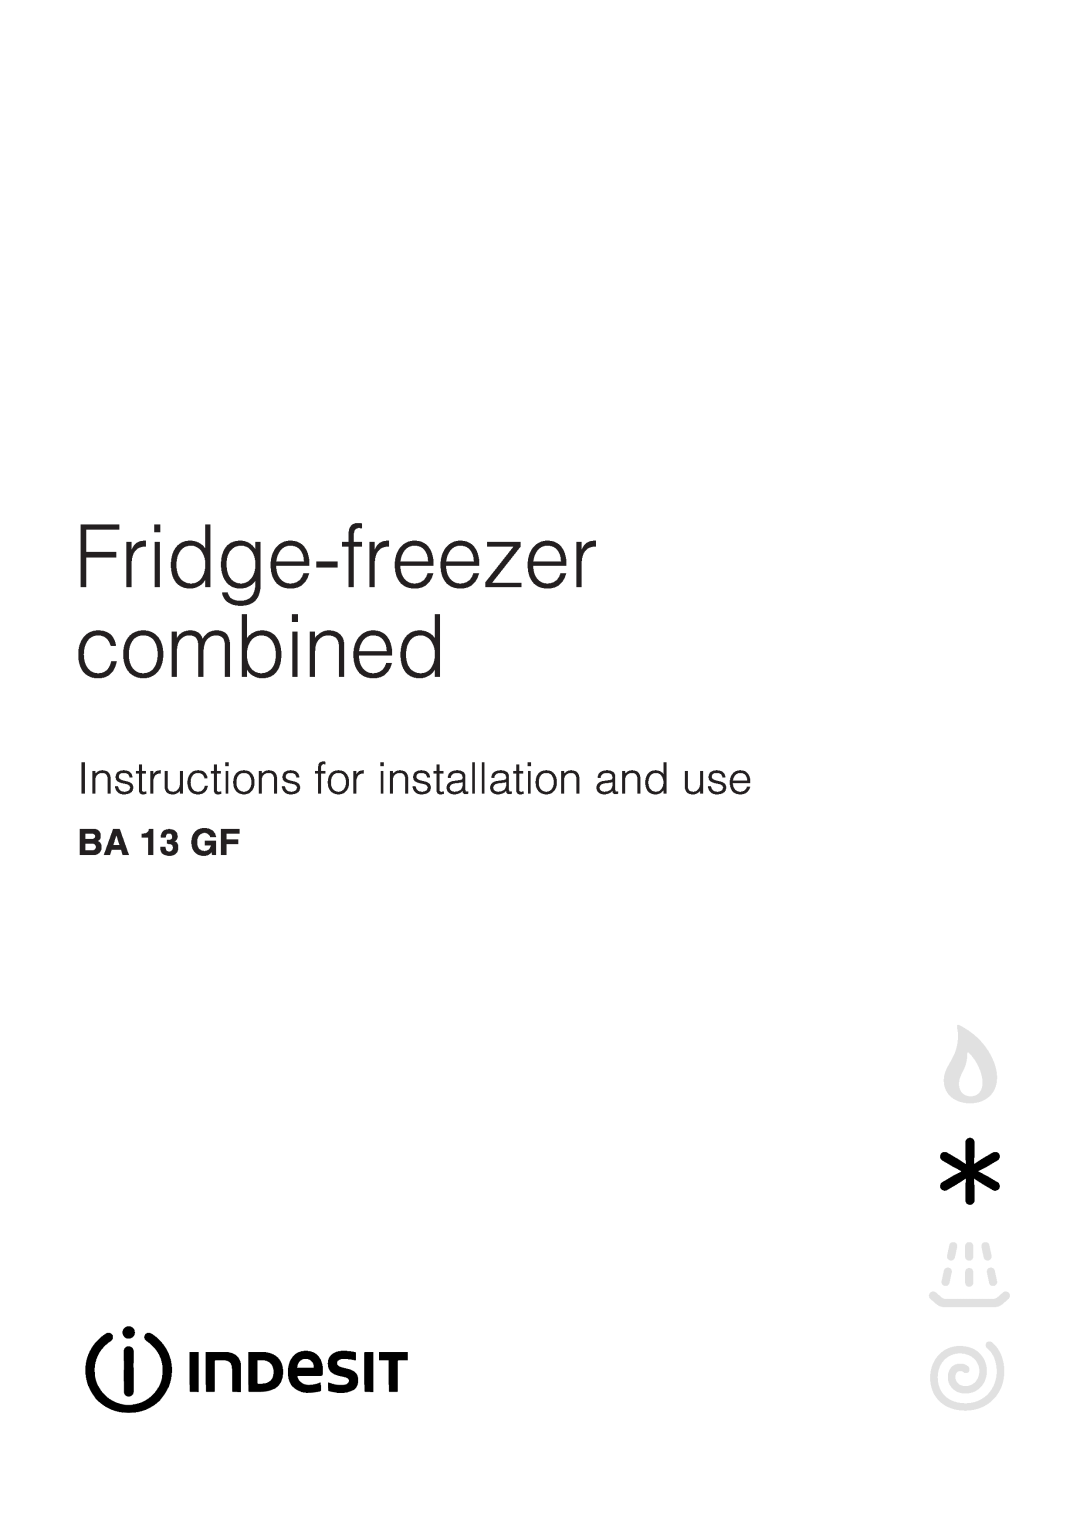 Indesit BA 13 GF manual Fridge-freezer combined, Instructions for installation and use 